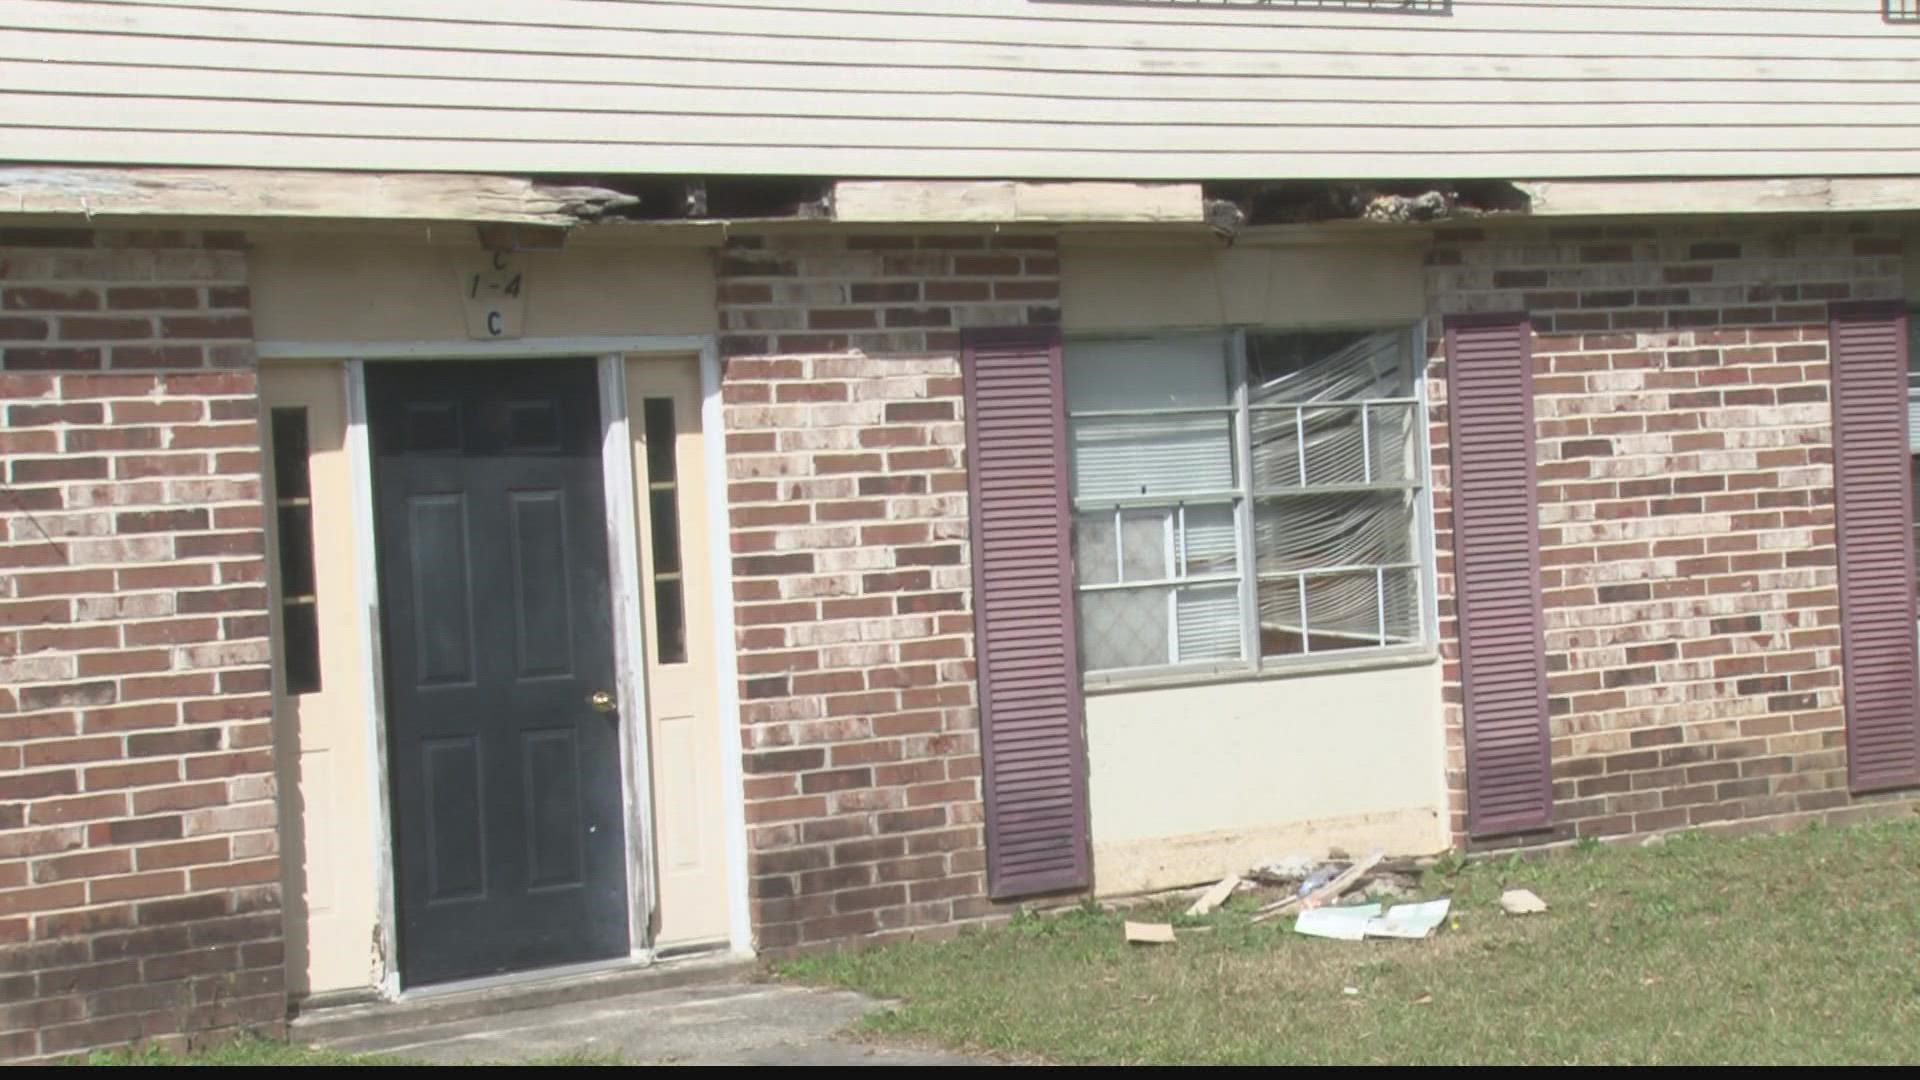 People at Macon's Miga Villa Apartments might be moving out sooner than expected. According to Bibb County code enforcement finished their investigation on Tuesday.